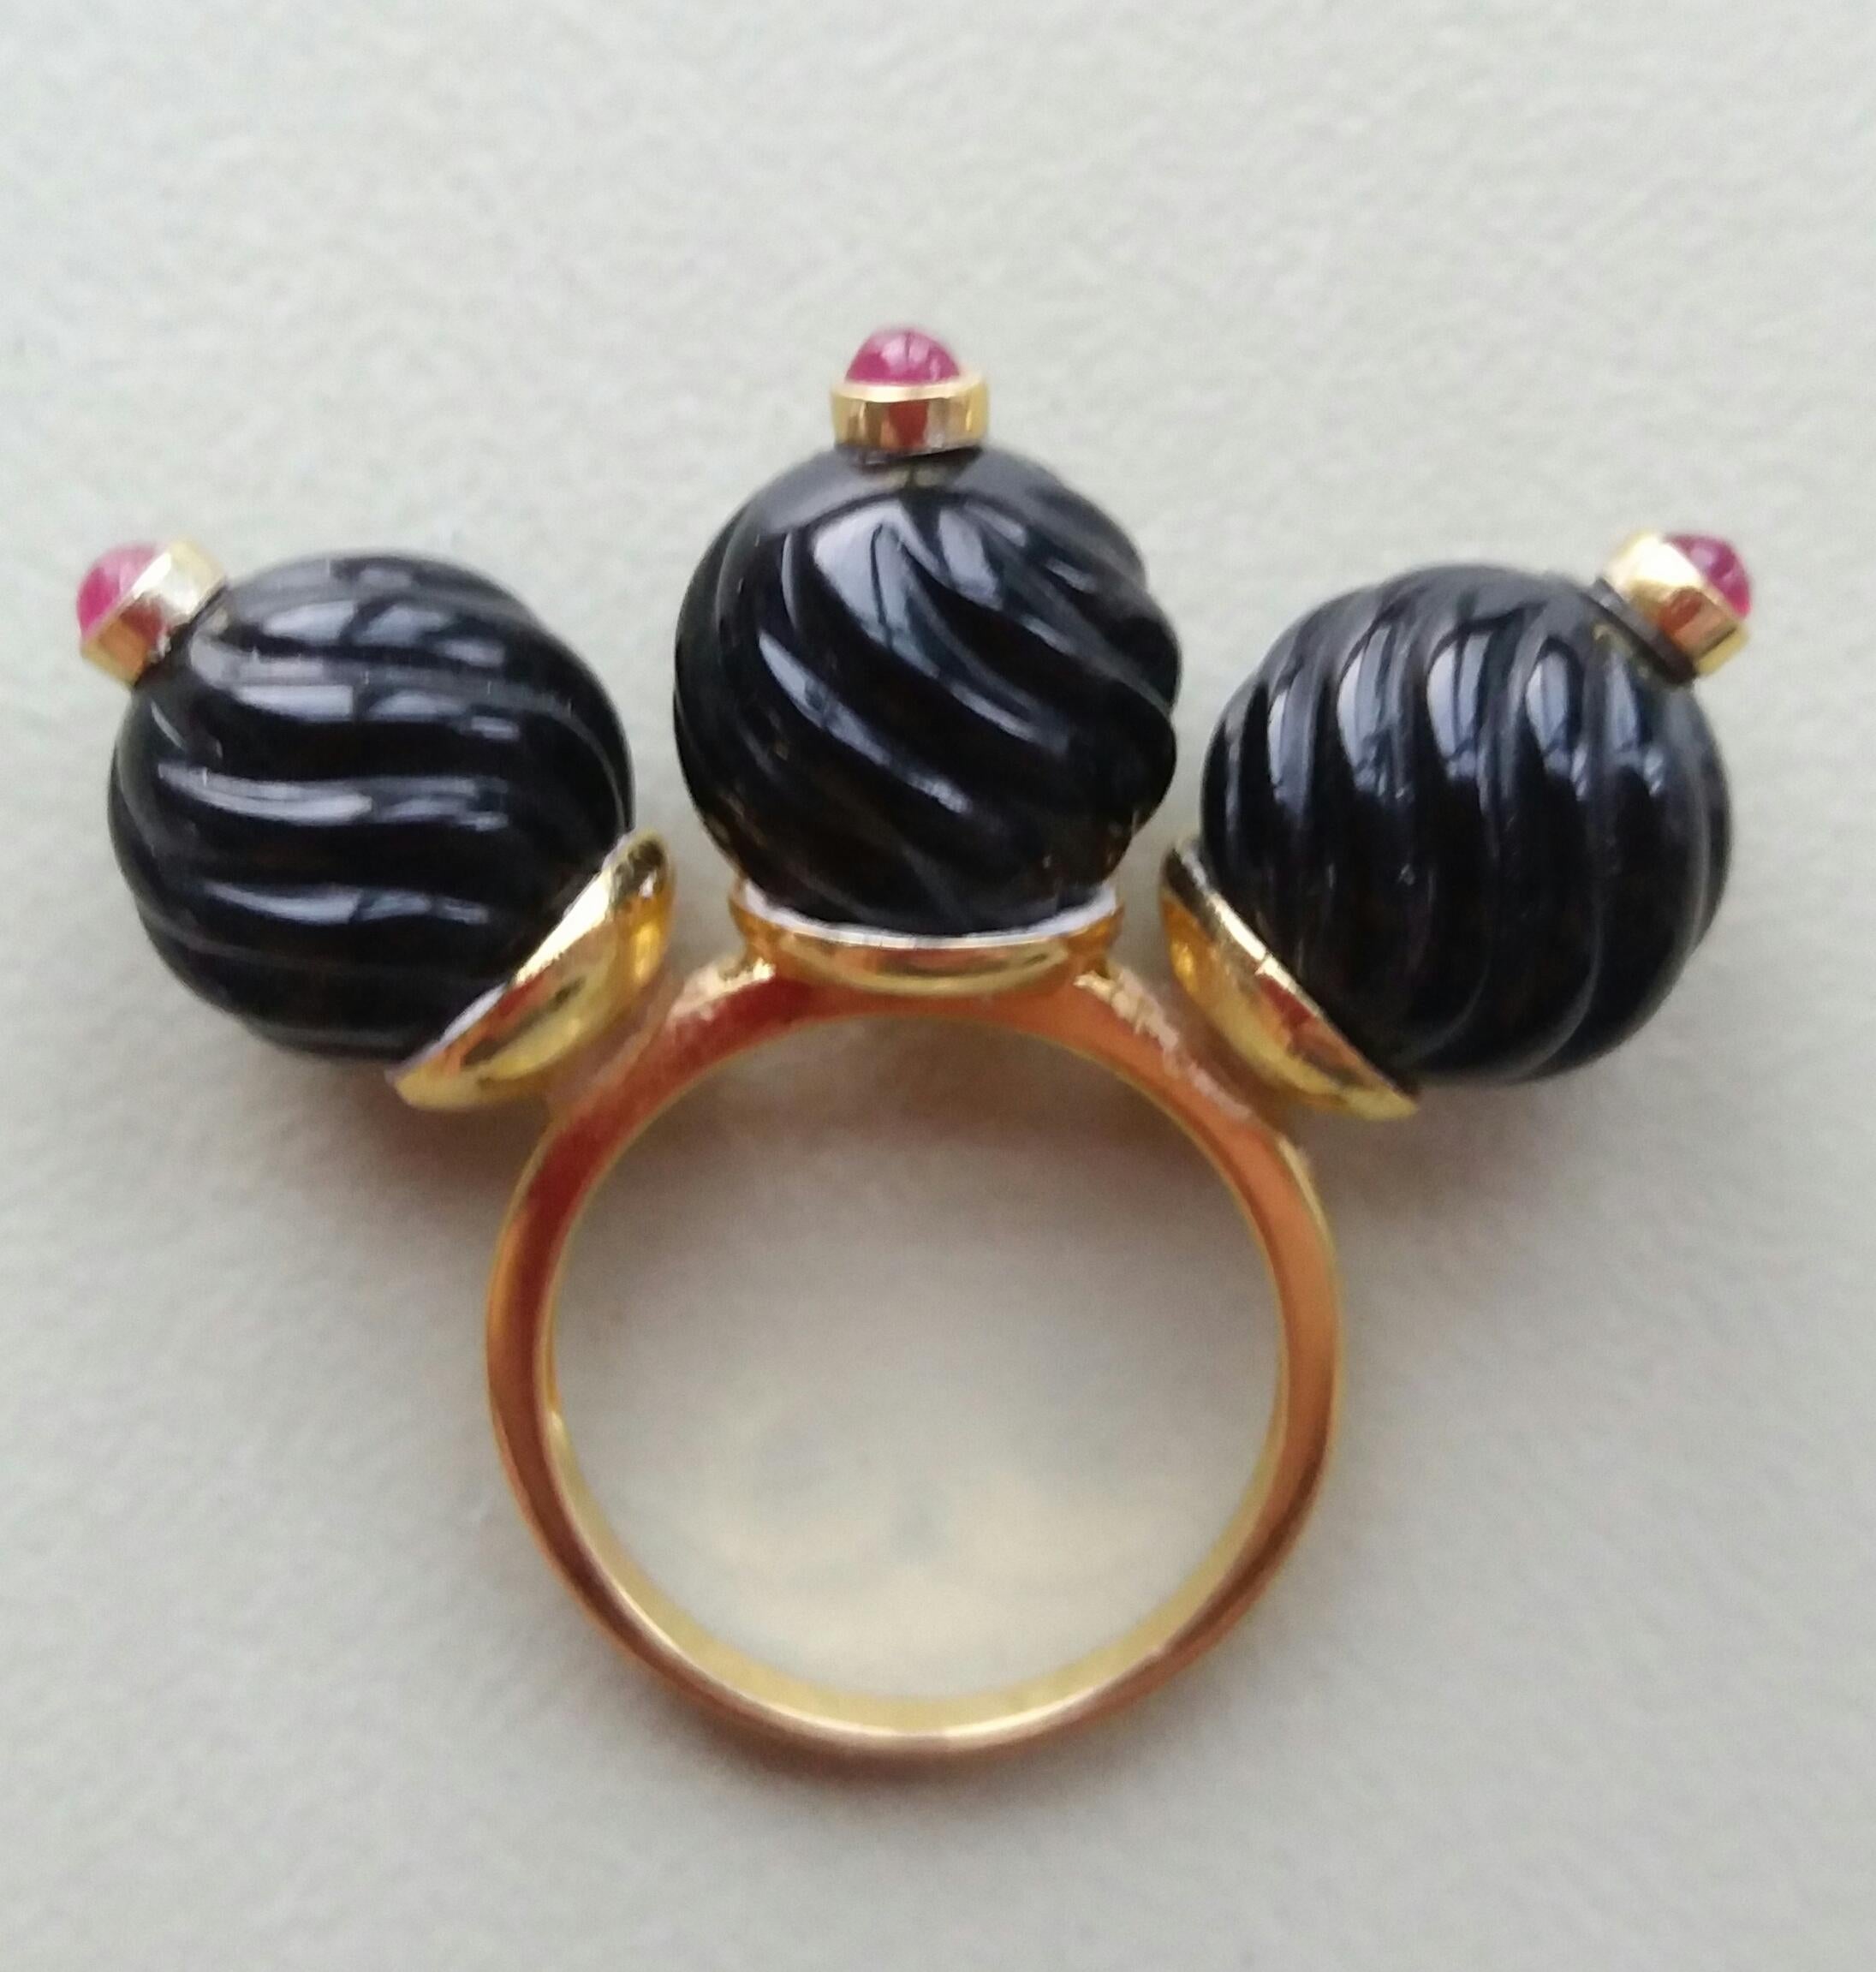 Unique and Classic Cocktail Ring composed of 3 engraved Black Onyx spheres of 12 mm. in diameter surmounted by 3 small Ruby cabochons set in yellow gold bezels,all set on a 3 cup yellow gold shank.
In 1978 our workshop started in Italy to make